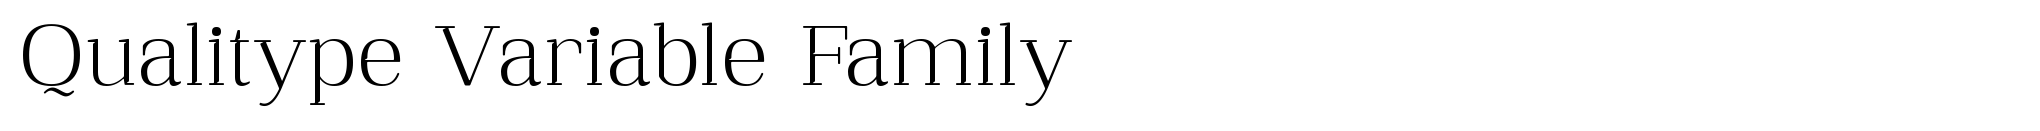 Qualitype Variable Family image